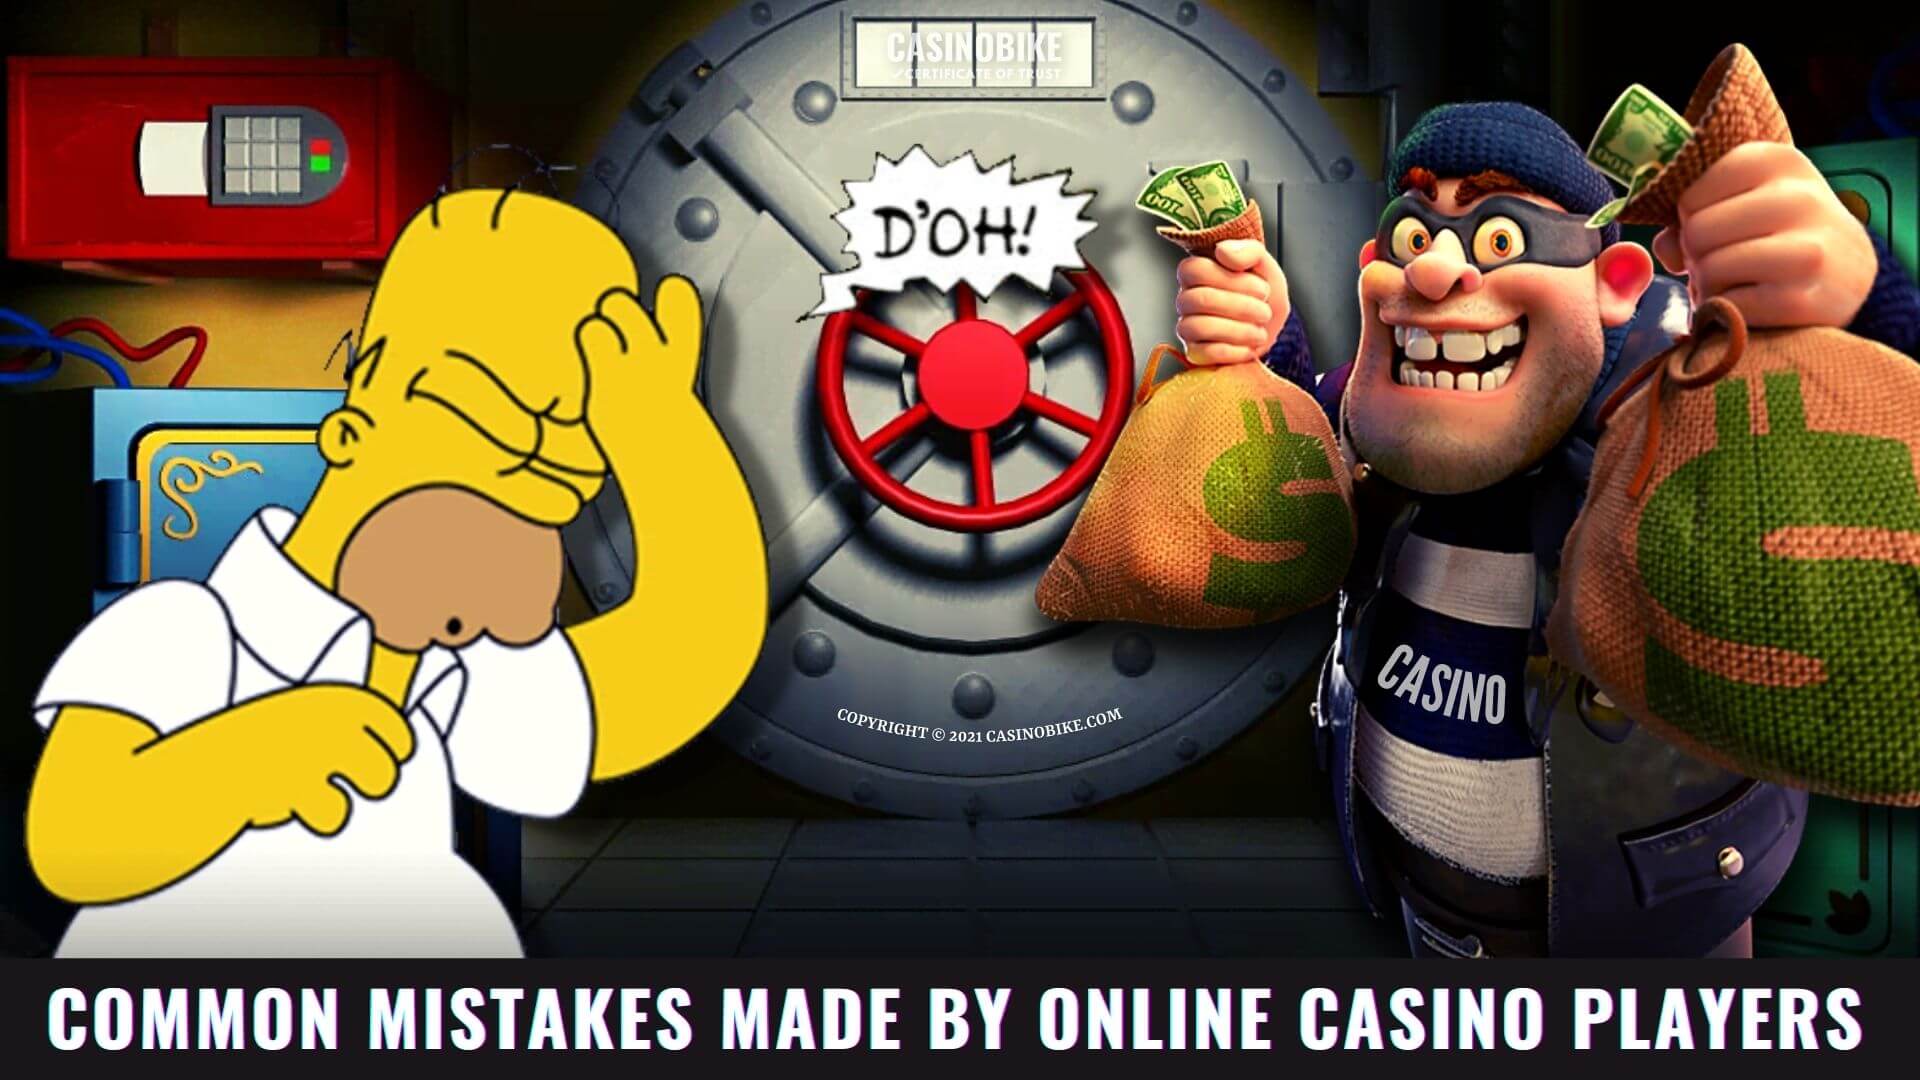 Common mistakes made by online casino players